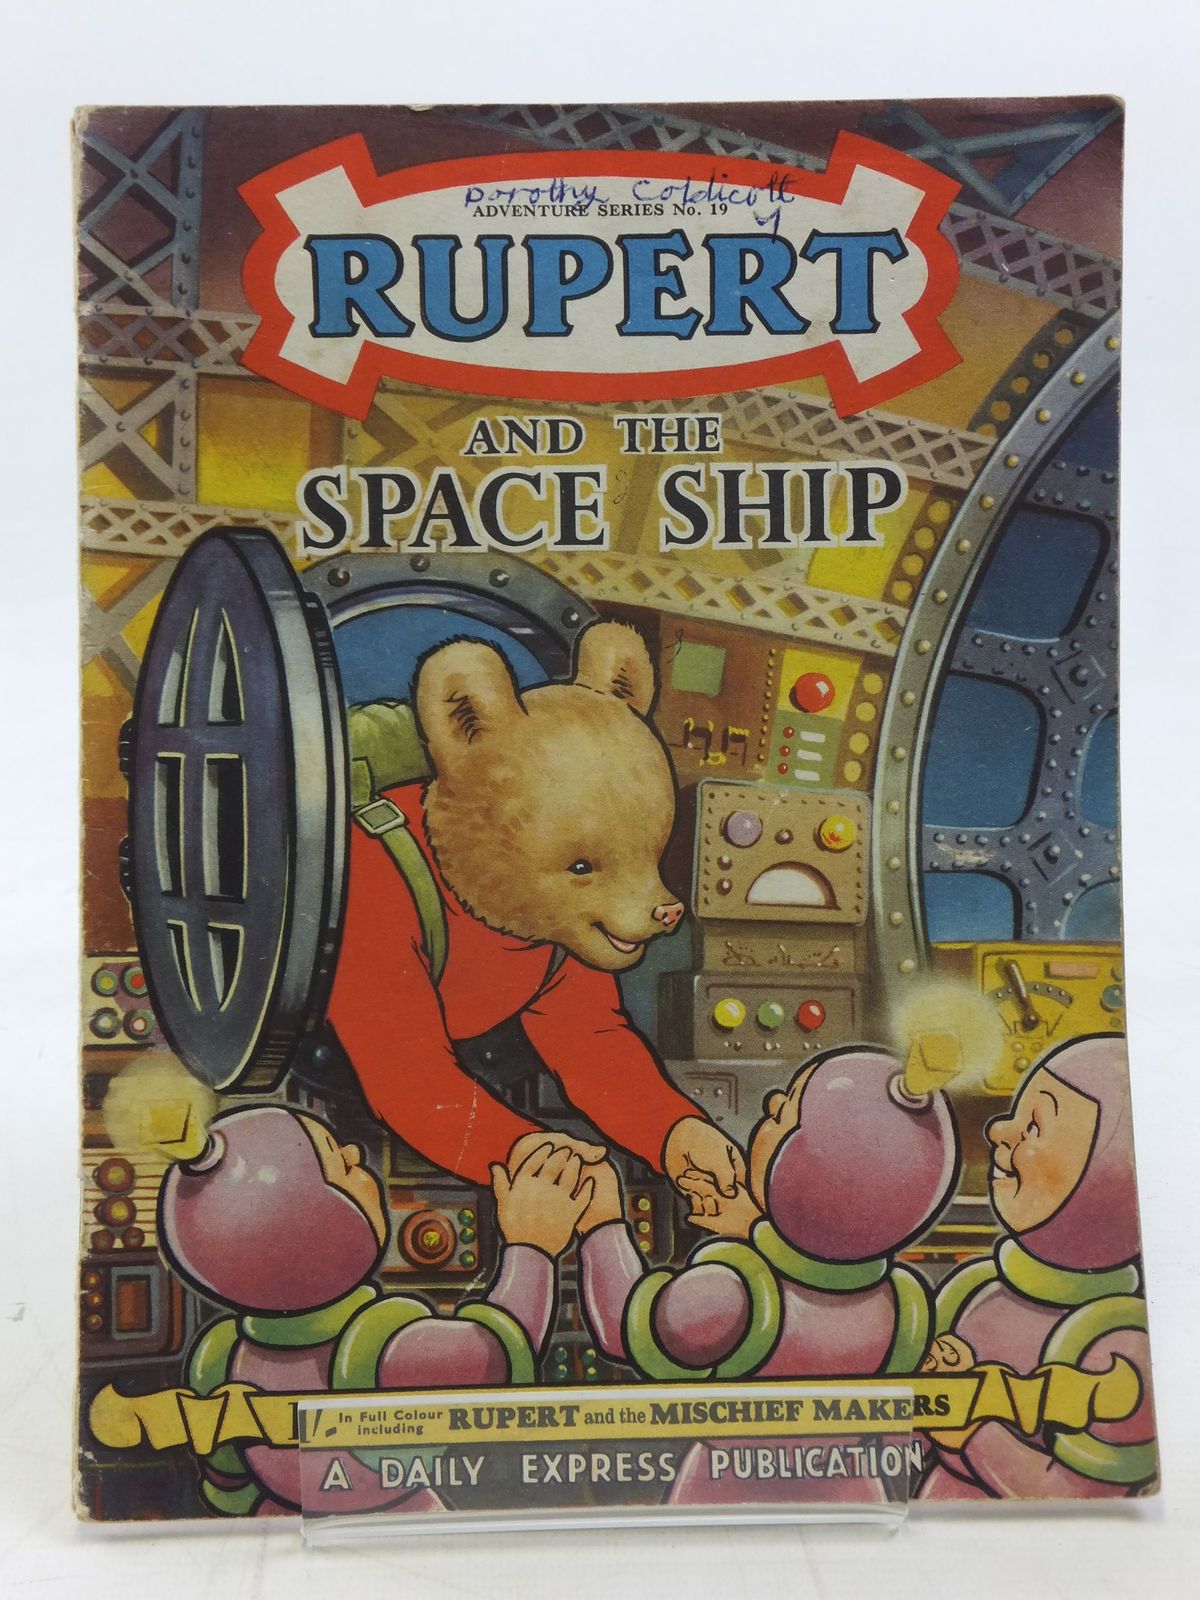 Photo of RUPERT ADVENTURE SERIES No. 19 - RUPERT AND THE SPACE SHIP written by Bestall, Alfred illustrated by Bestall, Alfred published by Daily Express (STOCK CODE: 2115841)  for sale by Stella & Rose's Books